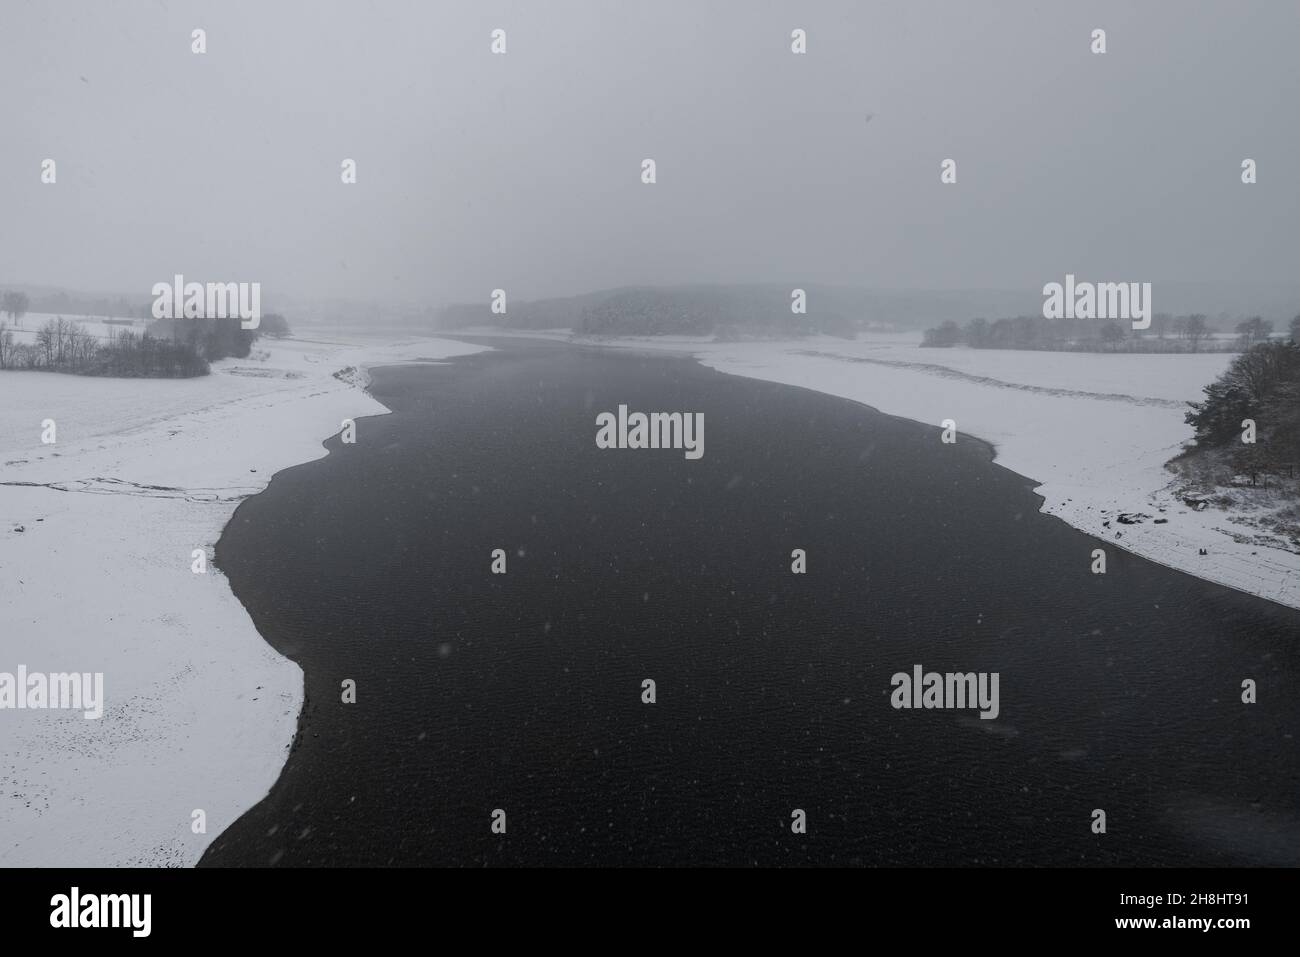 The reservoir lake on the dam in Eixendorf in winter with snow during snow storm seen from bridge above Stock Photo